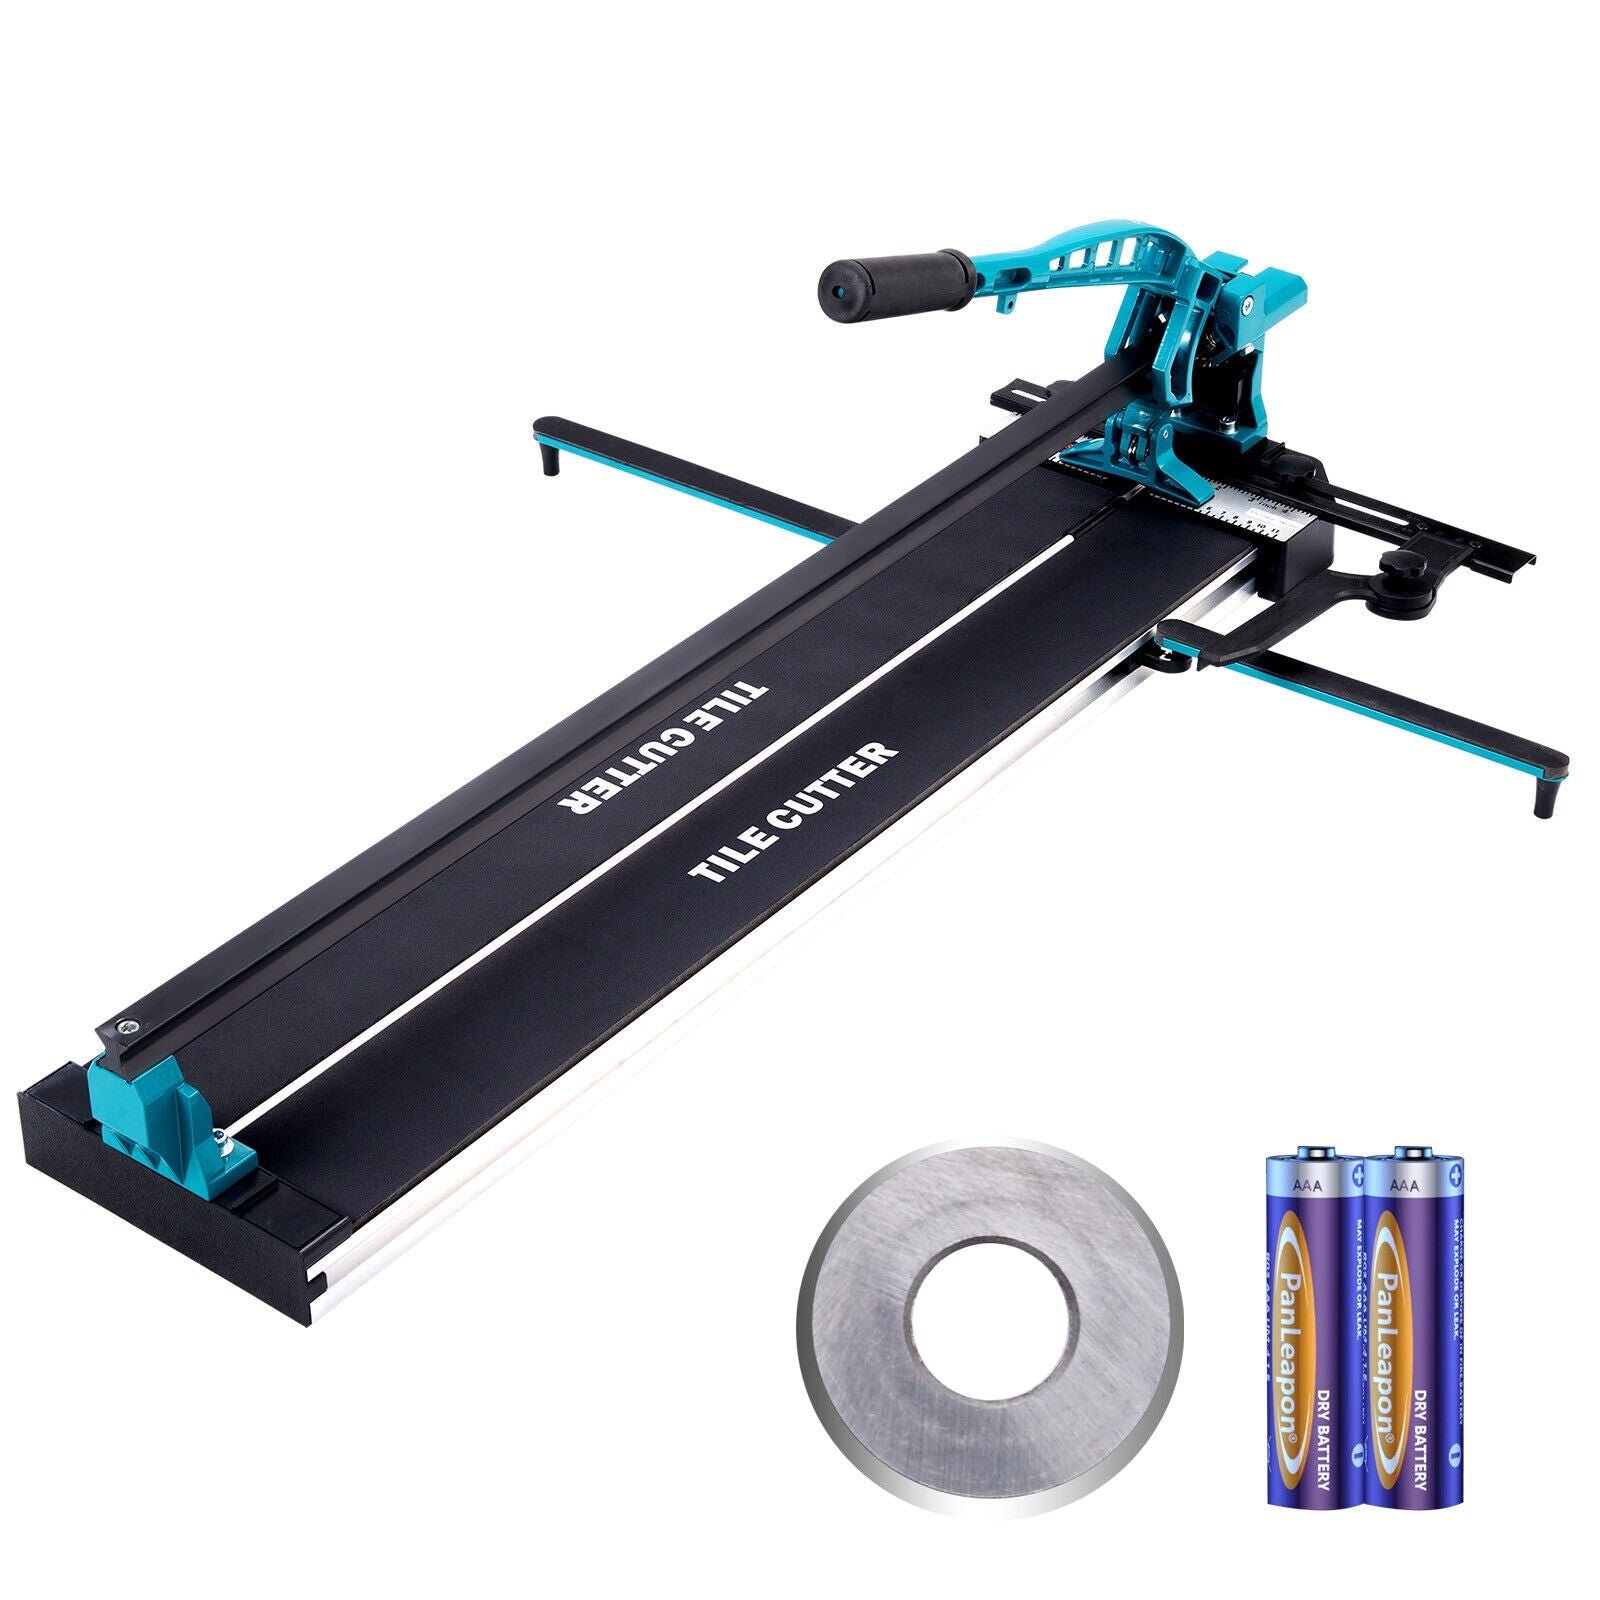 PREMIUM 1200mm Manual Tile Cutter Cutting Machine With Infrared for Porcelain